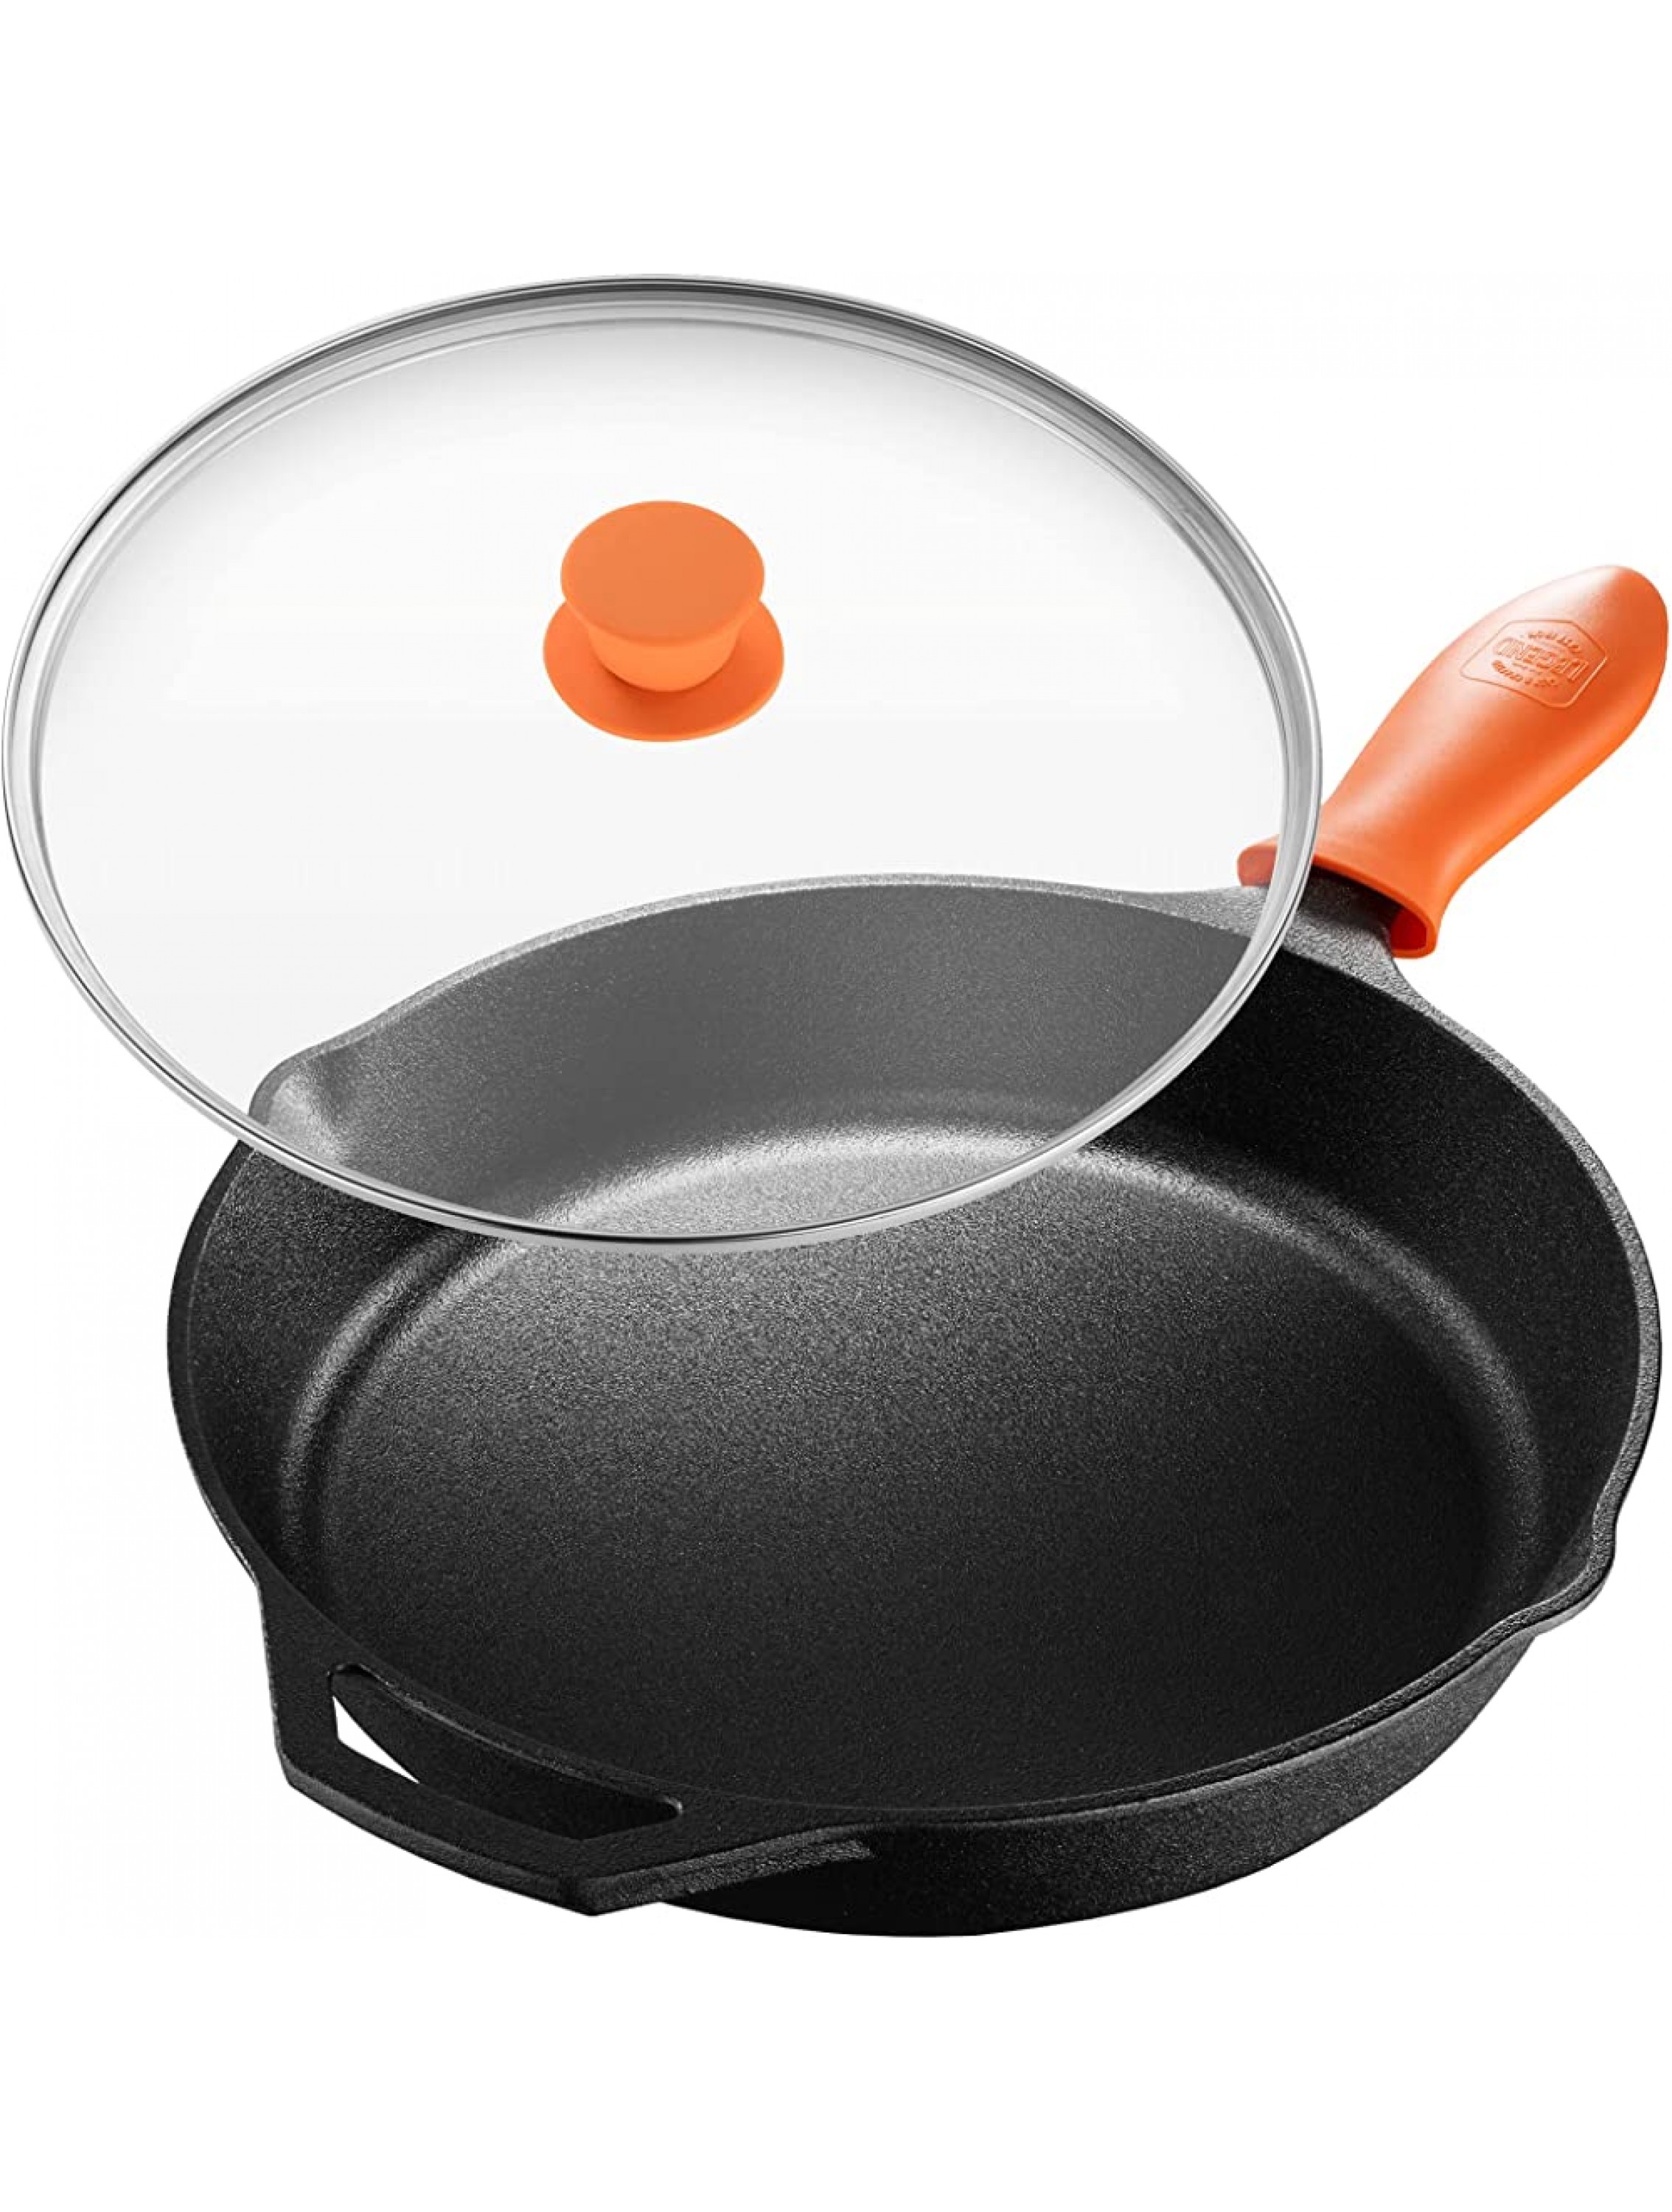 Legend Cast Iron Skillet with Lid | Large 12” Frying Pan with Glass Lid & Silicone Handle for Oven Induction Cooking Pizza Sautéing & Grilling | Lightly Pre-Seasoned Cookware Gets Better with Use - B6SFWLHRZ